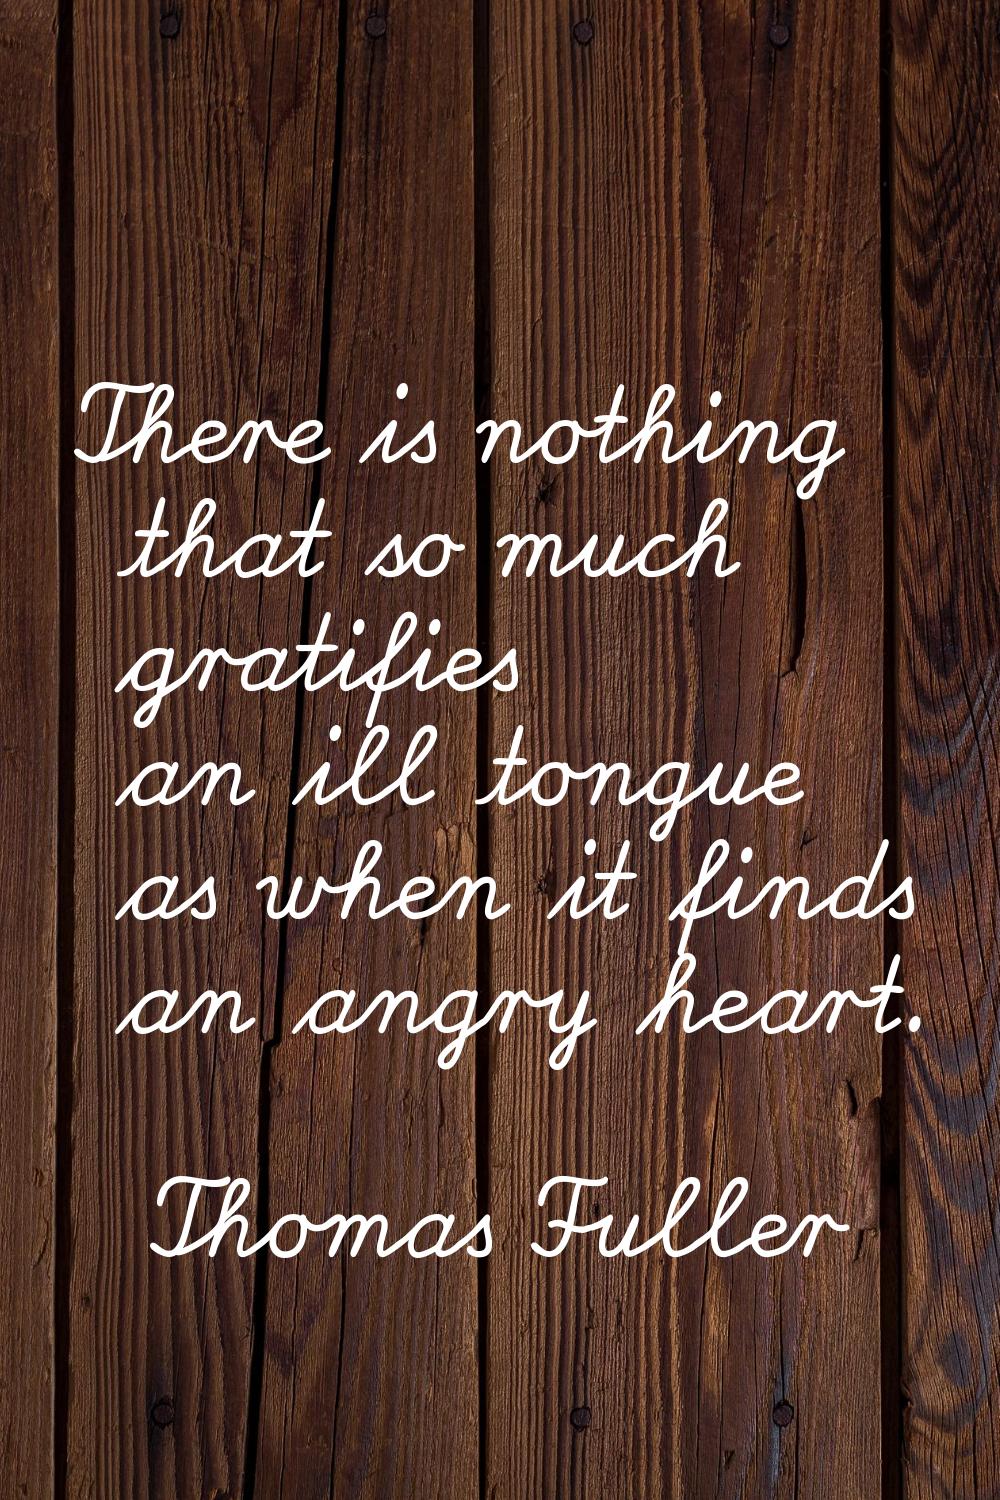 There is nothing that so much gratifies an ill tongue as when it finds an angry heart.